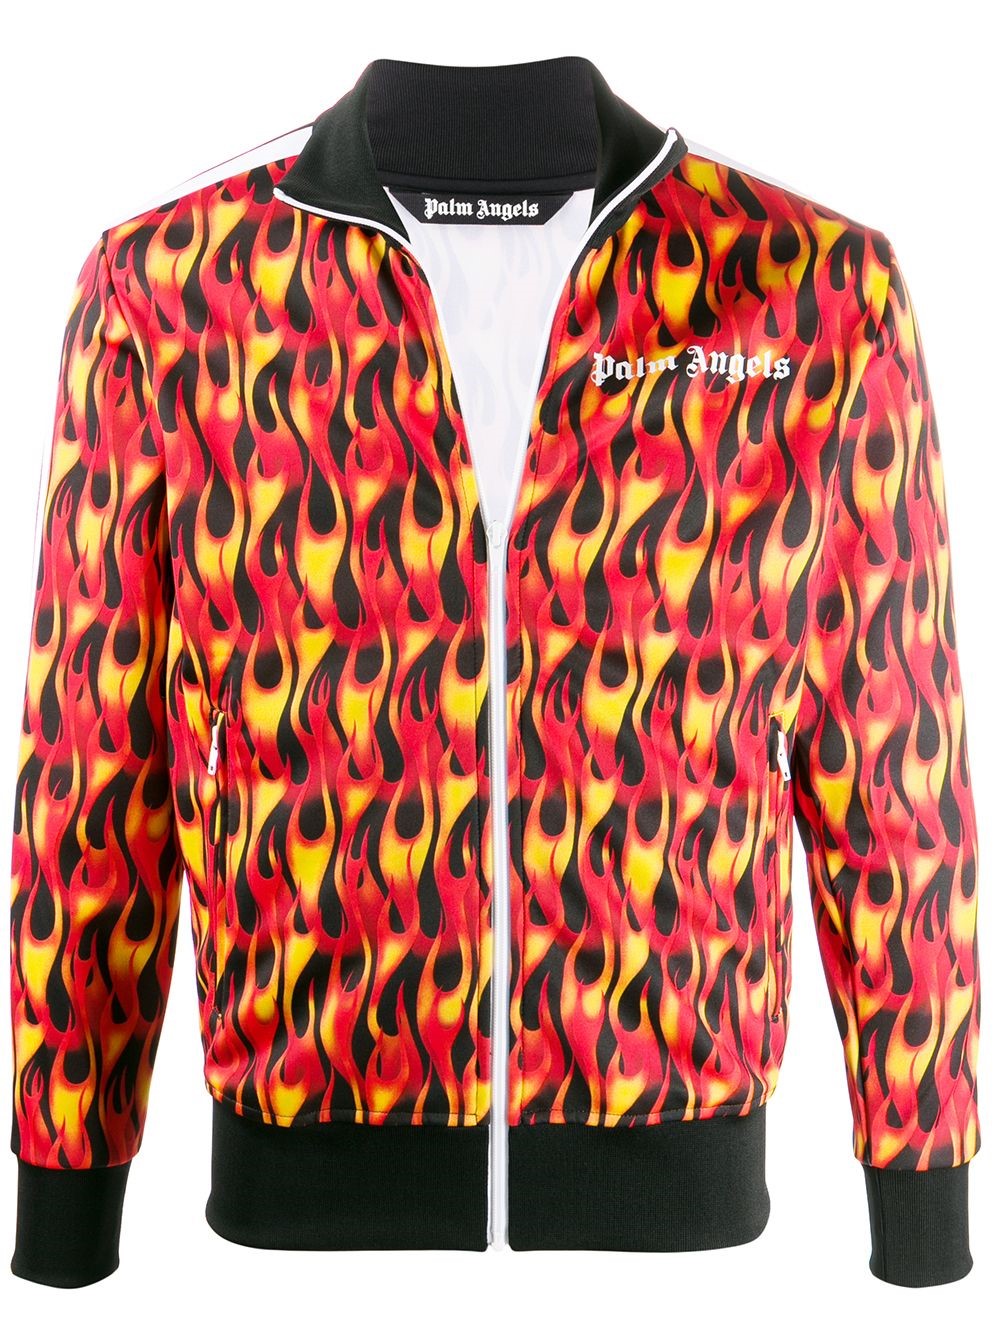 palm angels BURNING ZIPPED SWEATER available on montiboutique.com - 31948